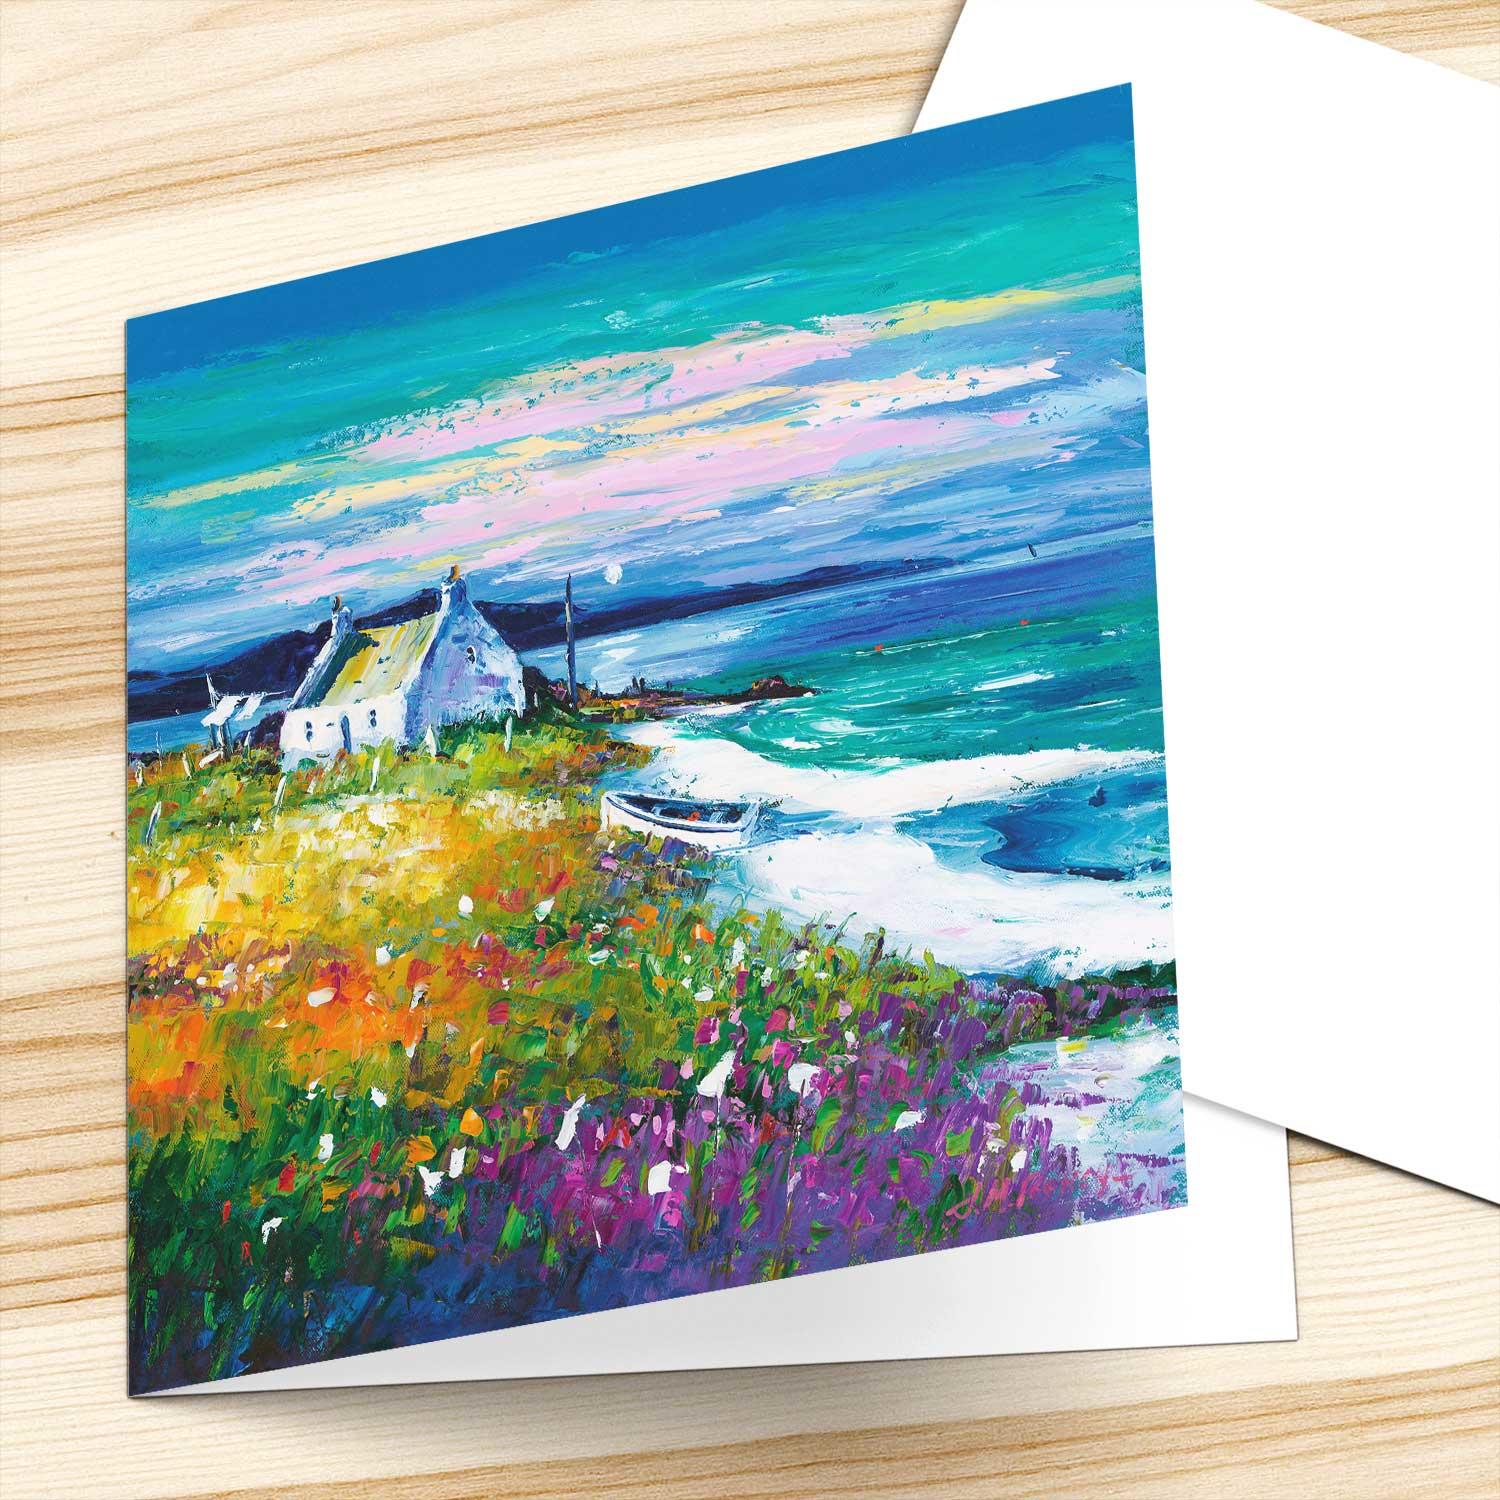 Evening Approaches, Isle of Lewis Greeting Card from an original painting by artist Jean Feeney